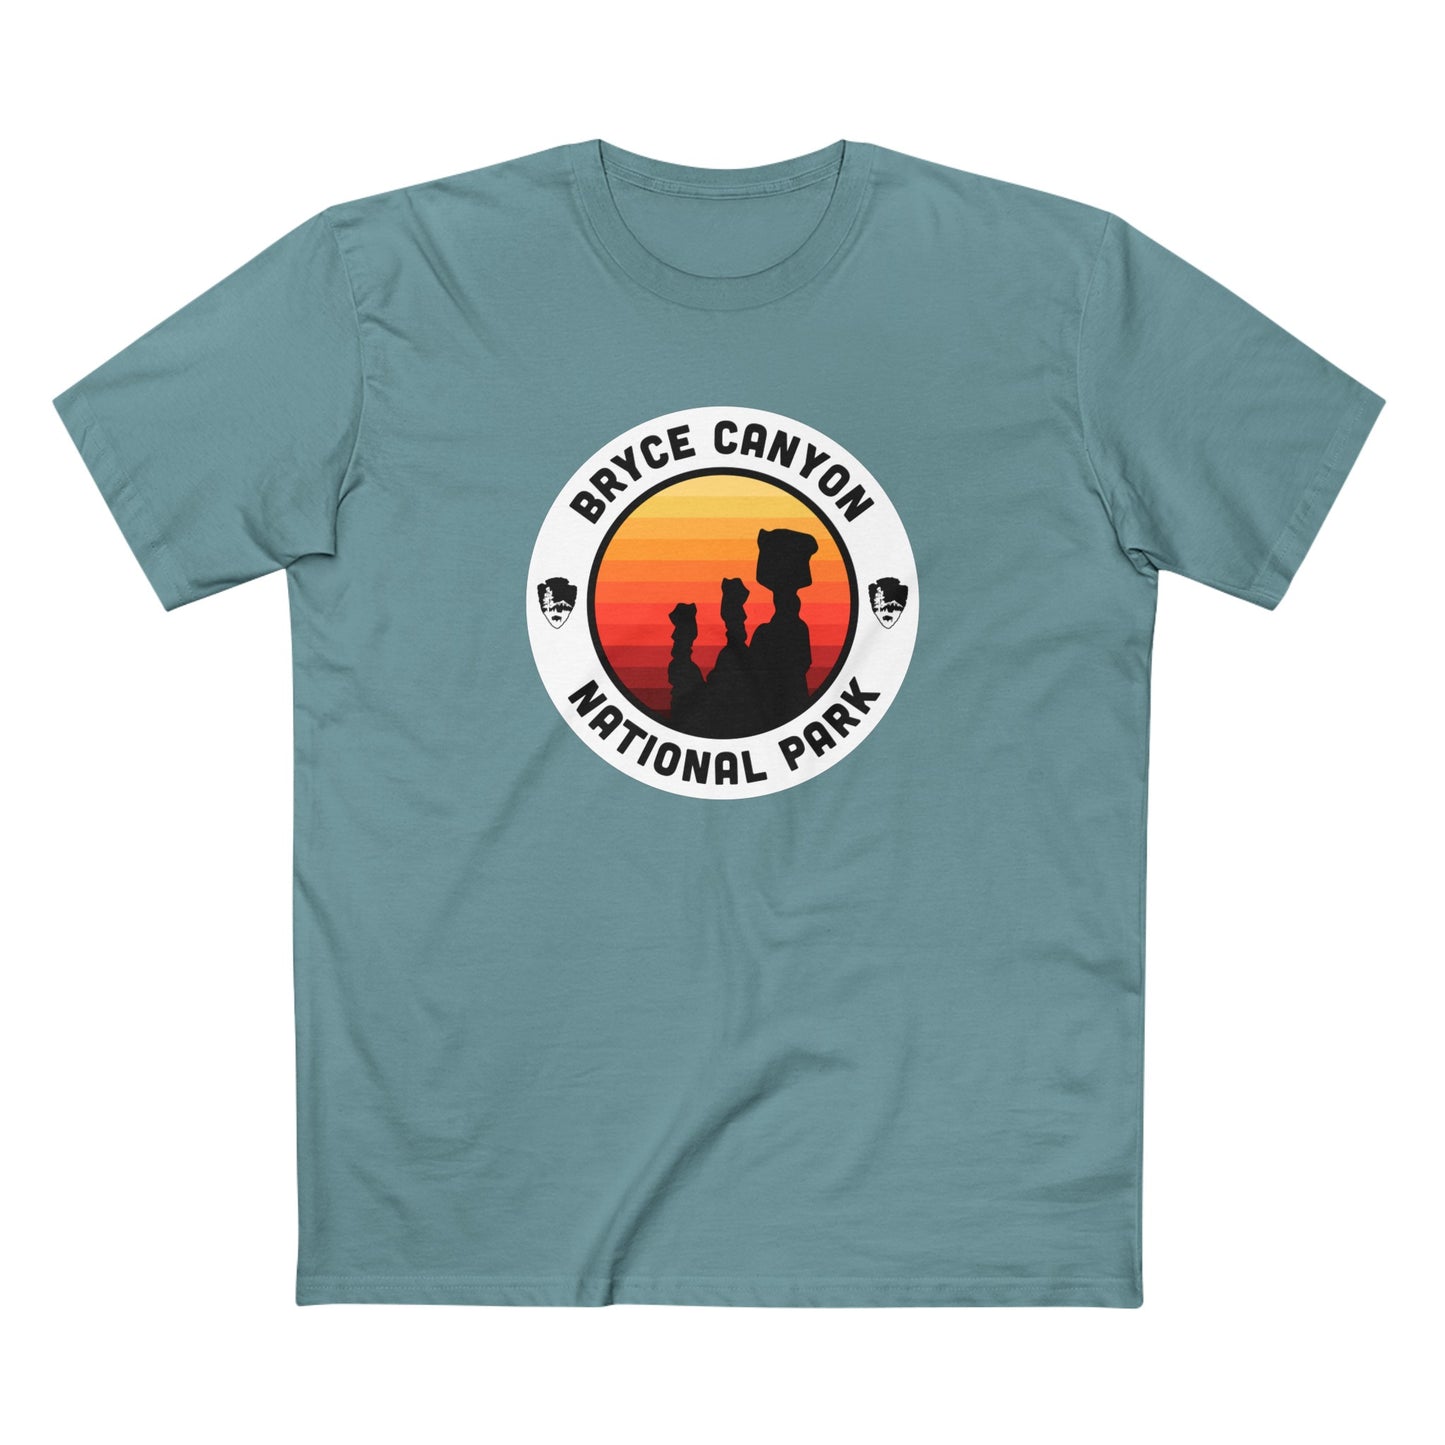 Bryce Canyon National Park - Round Badge Design